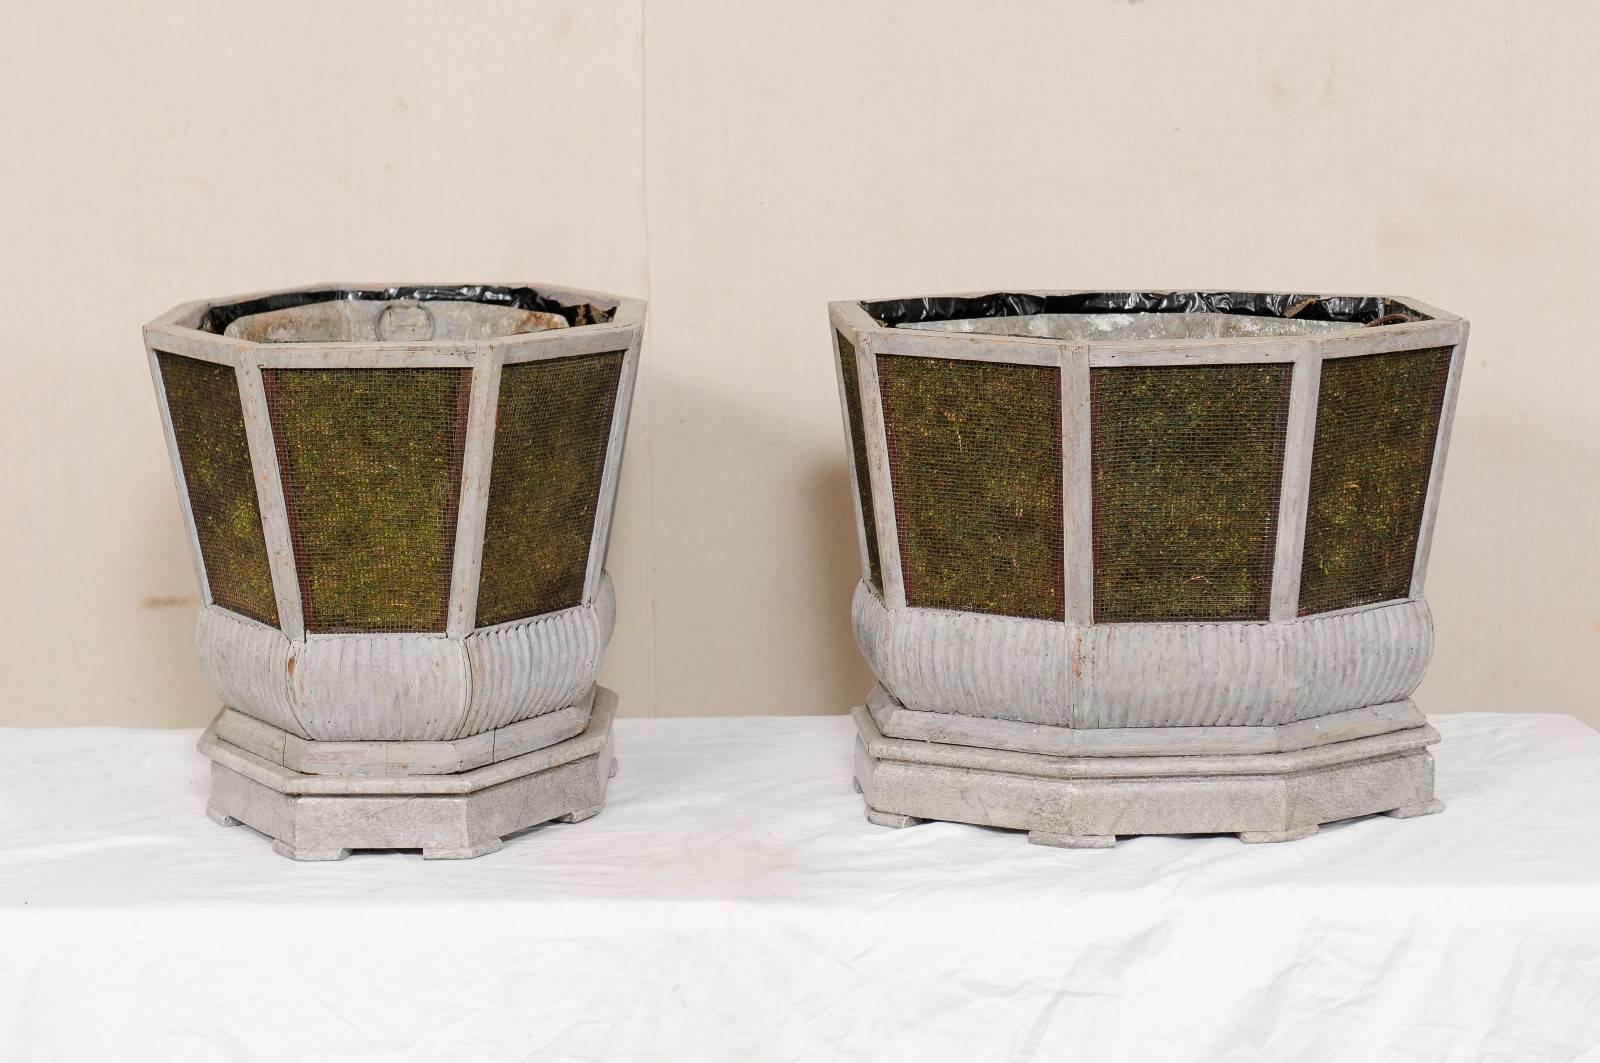 20th Century Pair of Unique Swedish Planters of Wood, Wire and Stone with Moss Inside, 1920s